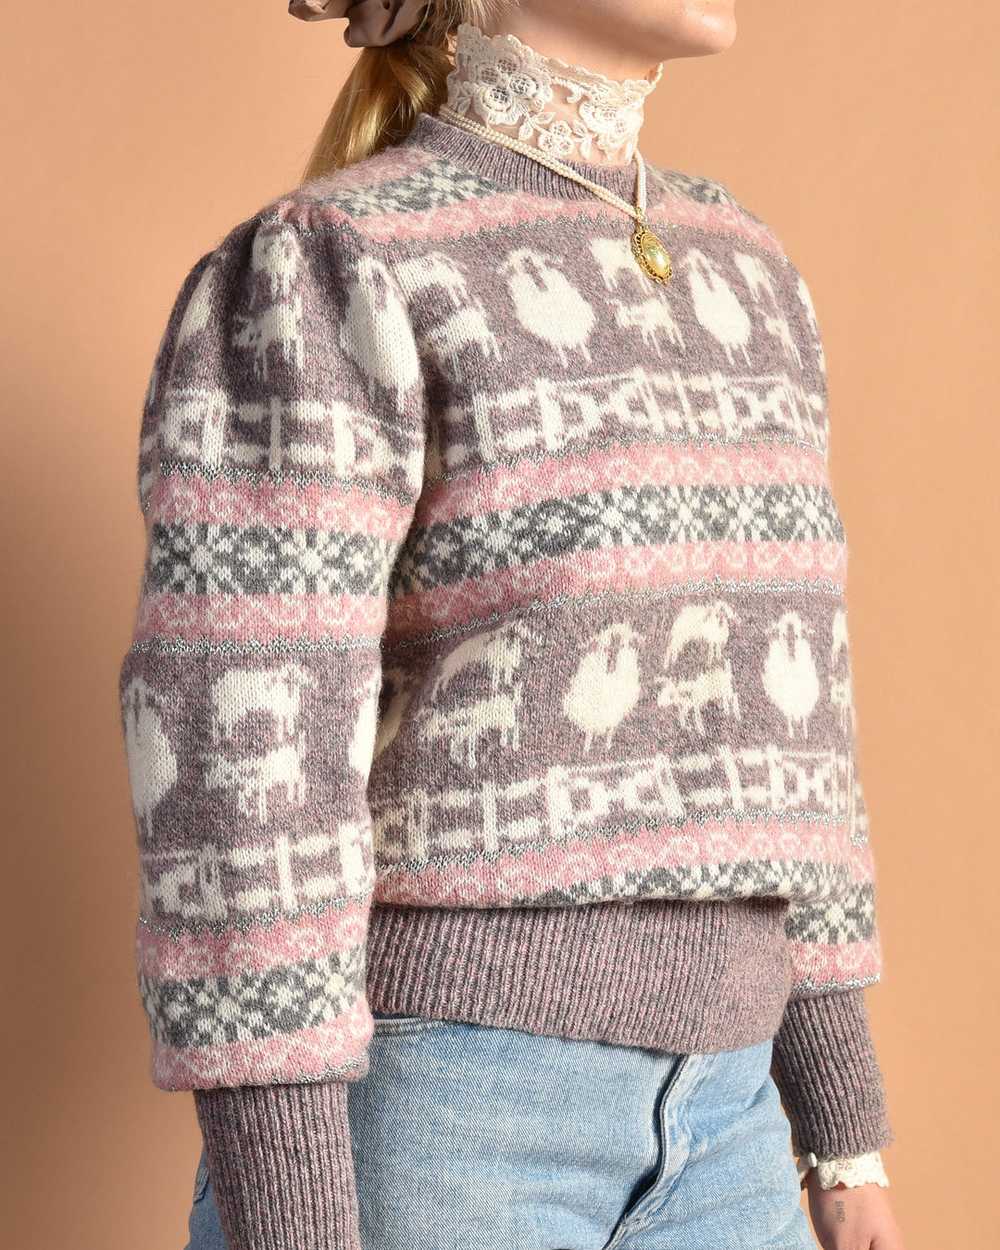 Dorian 1980s Sparkly Wool Sheep Sweater - image 8